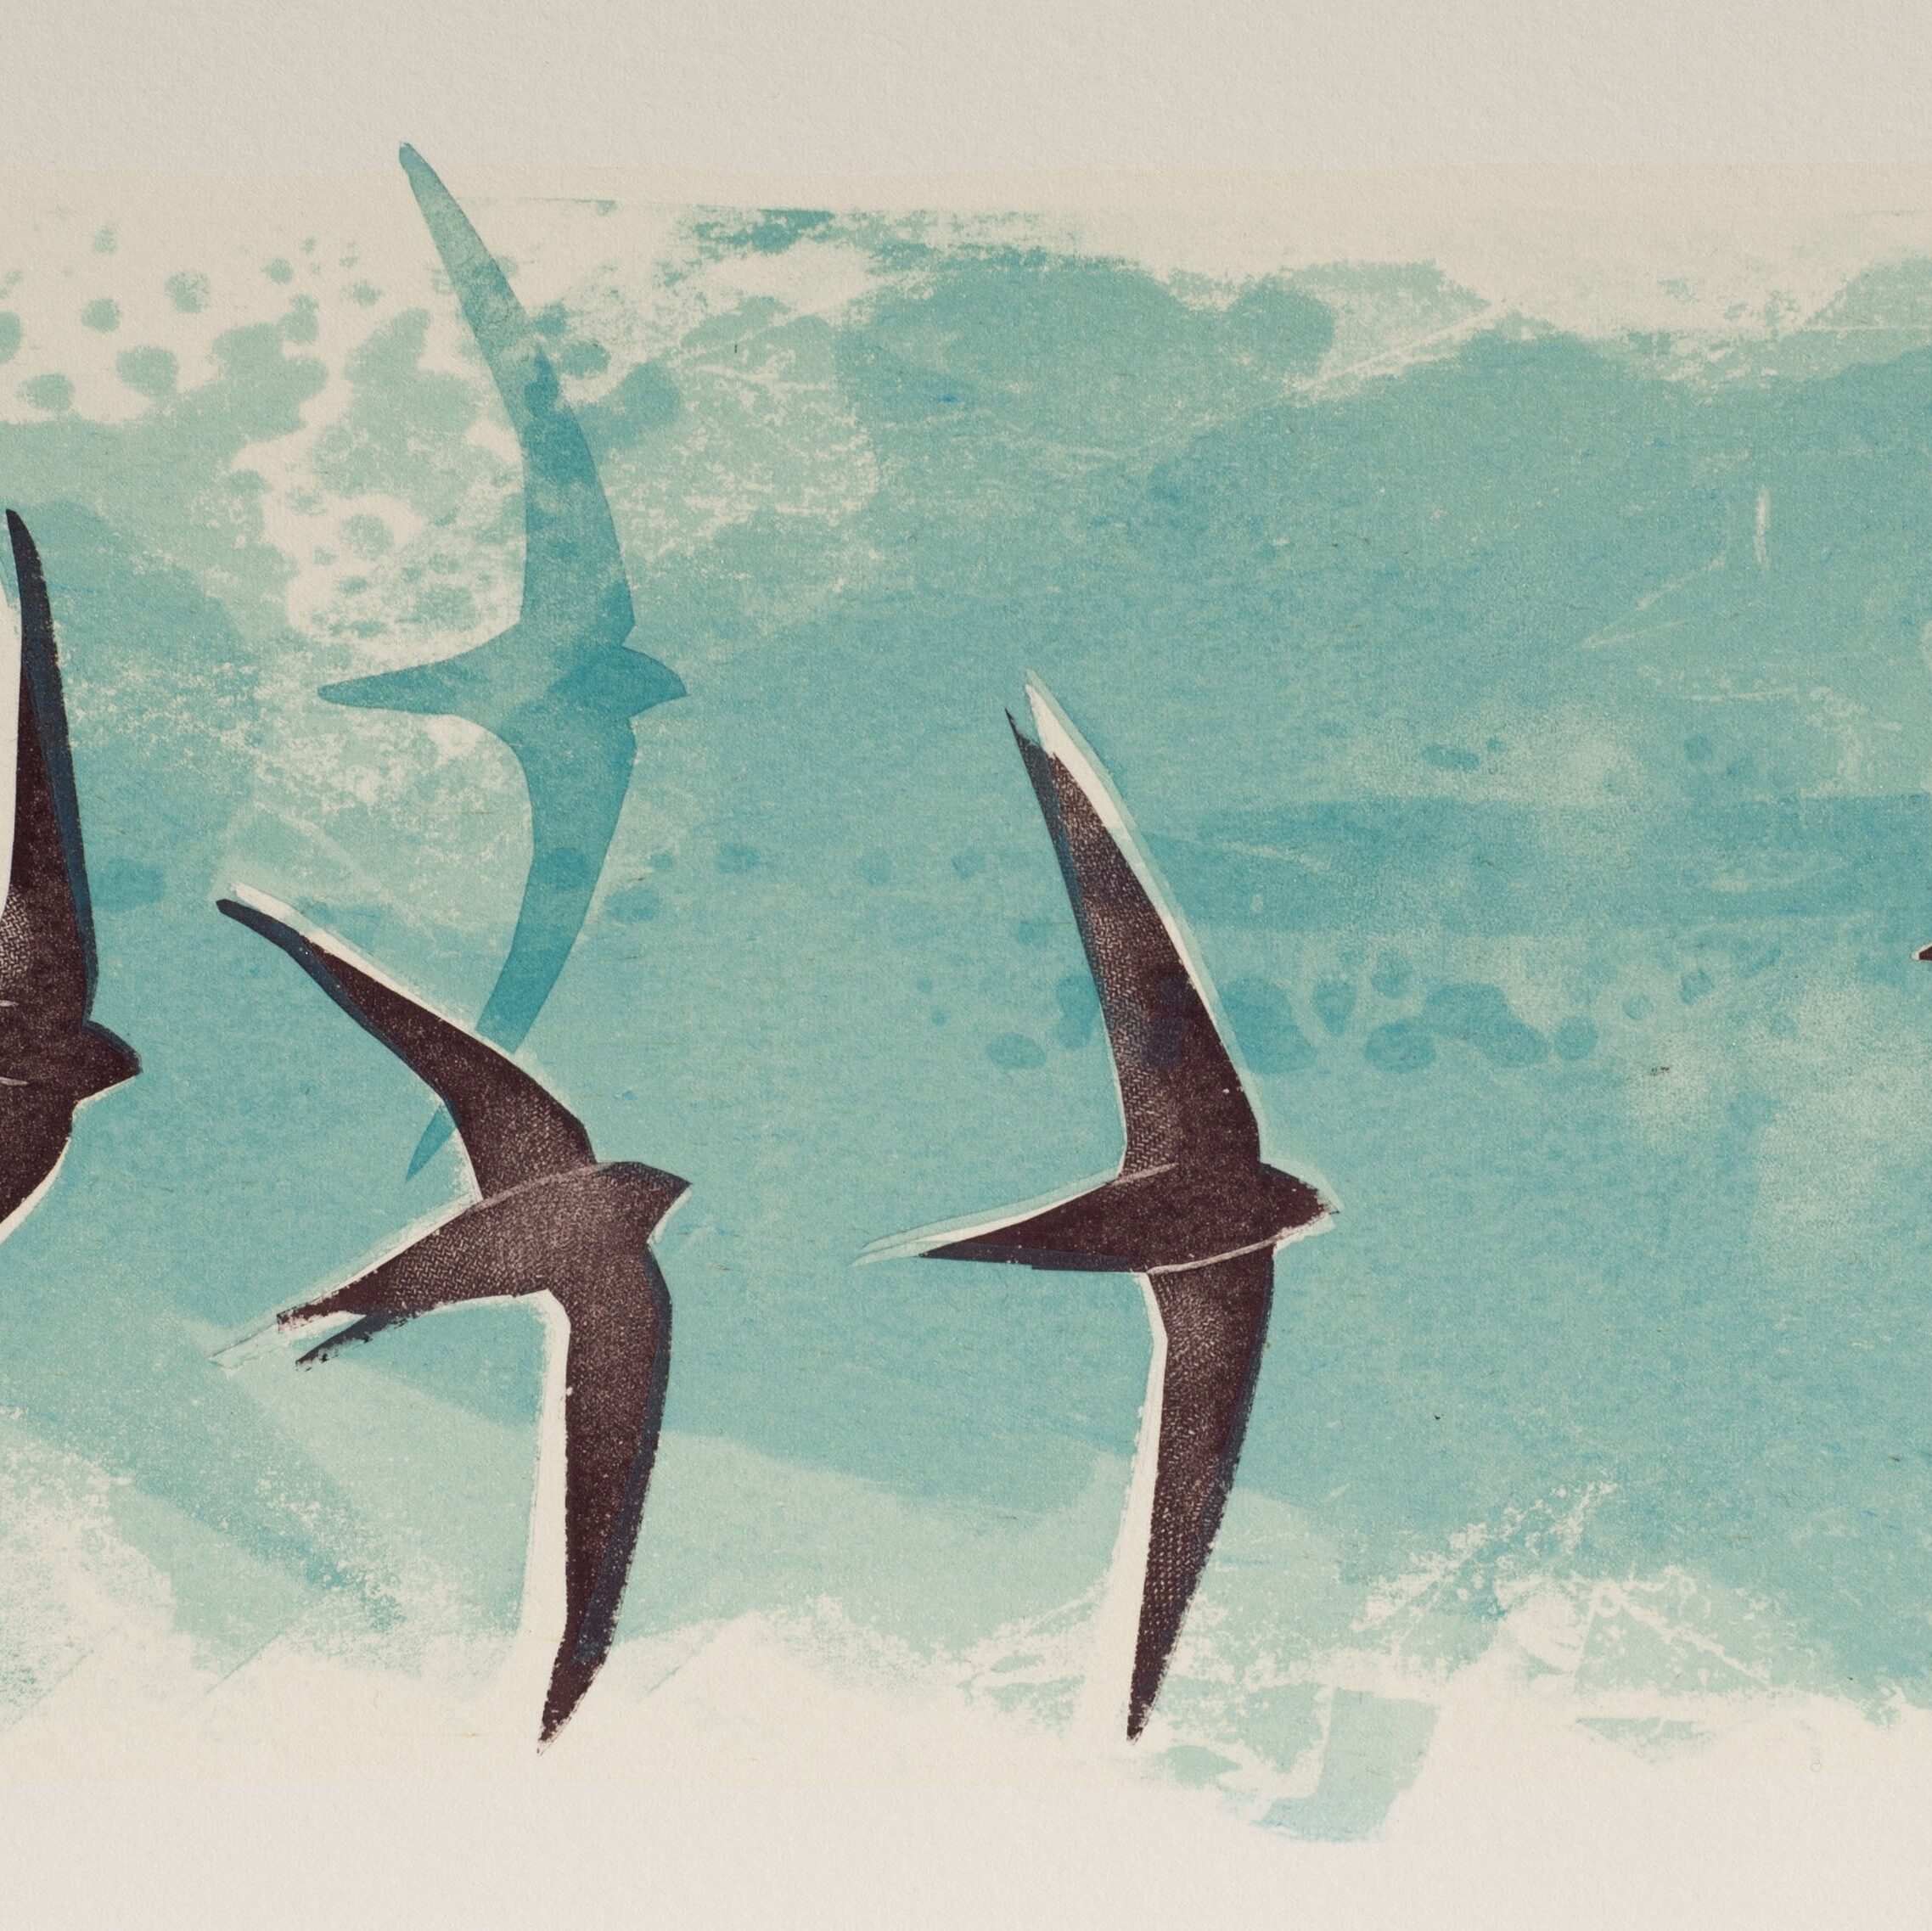   Summer Swifts by Jane Smith